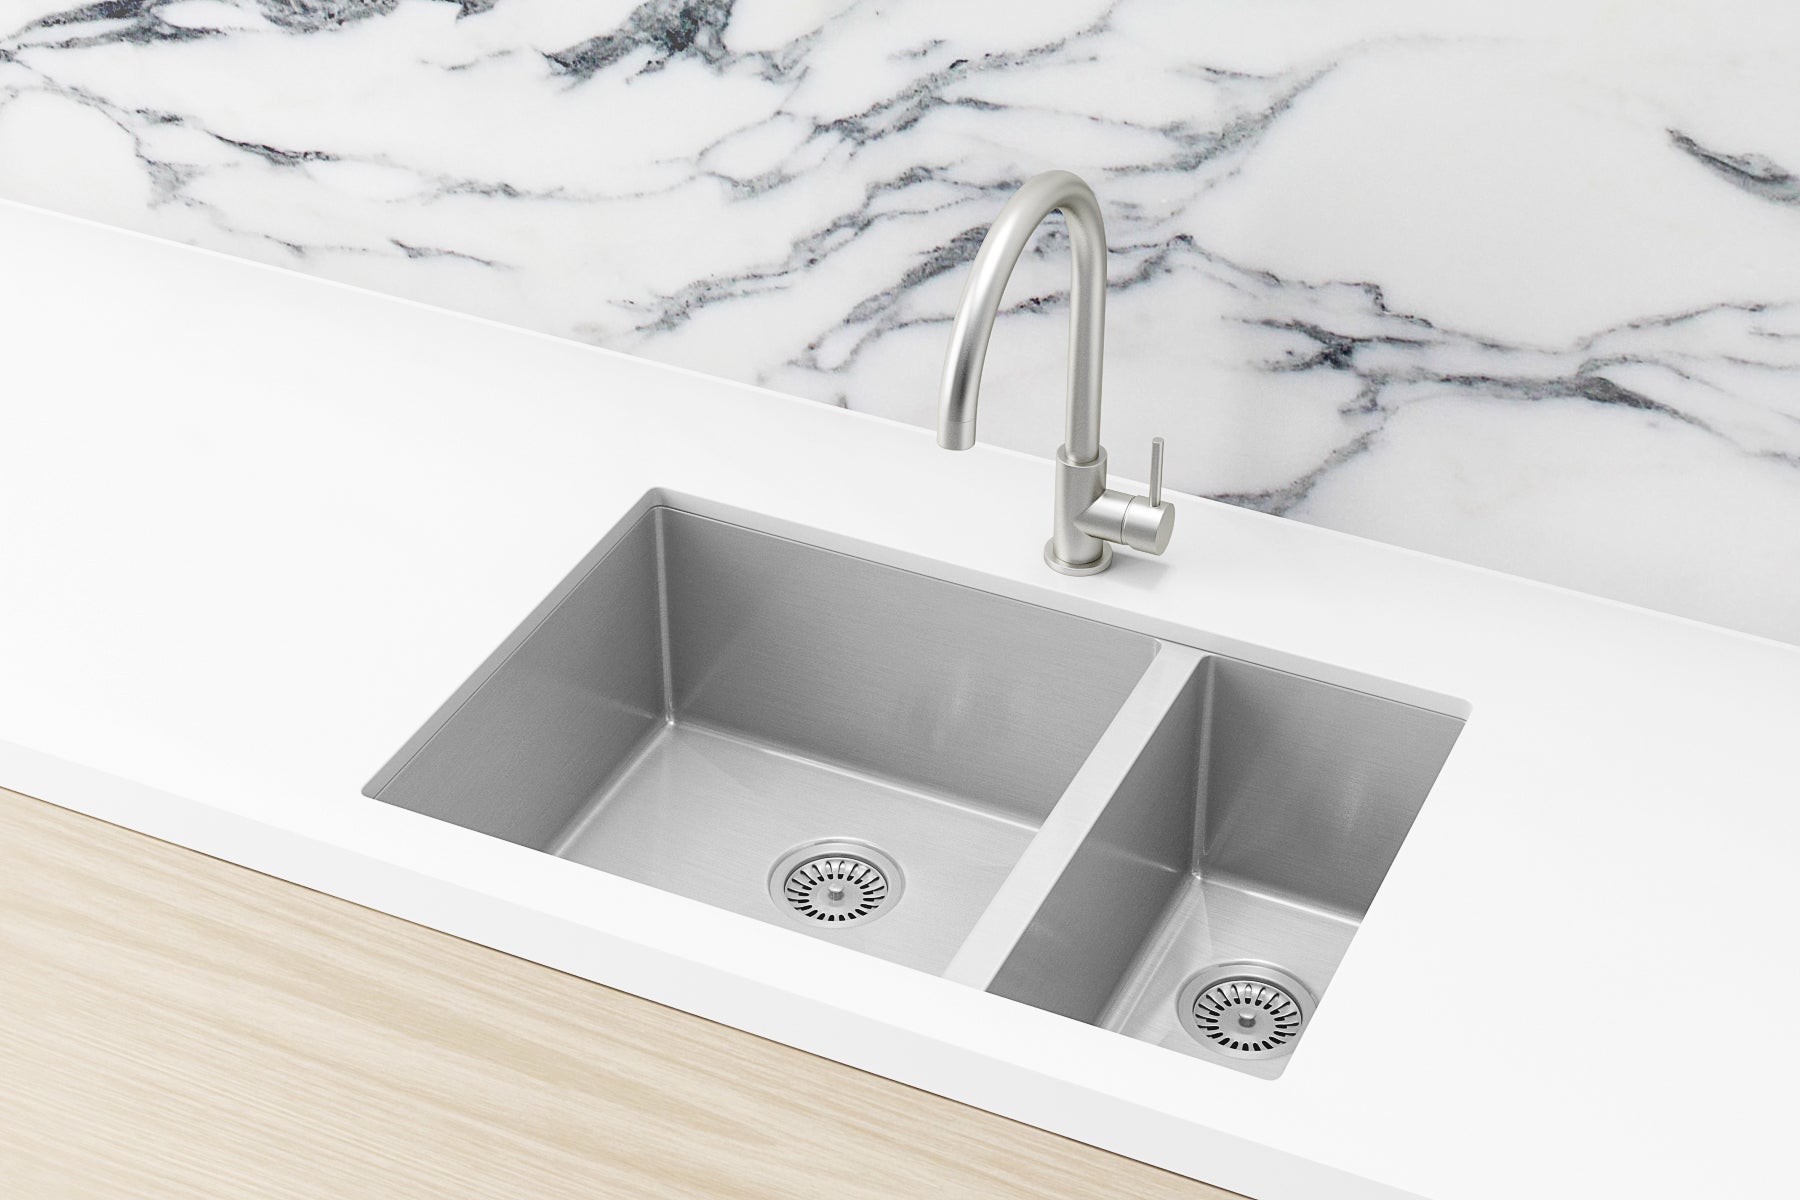 Kitchen Sink - One and Half Bowl 670 x 440 - Brushed Nickel